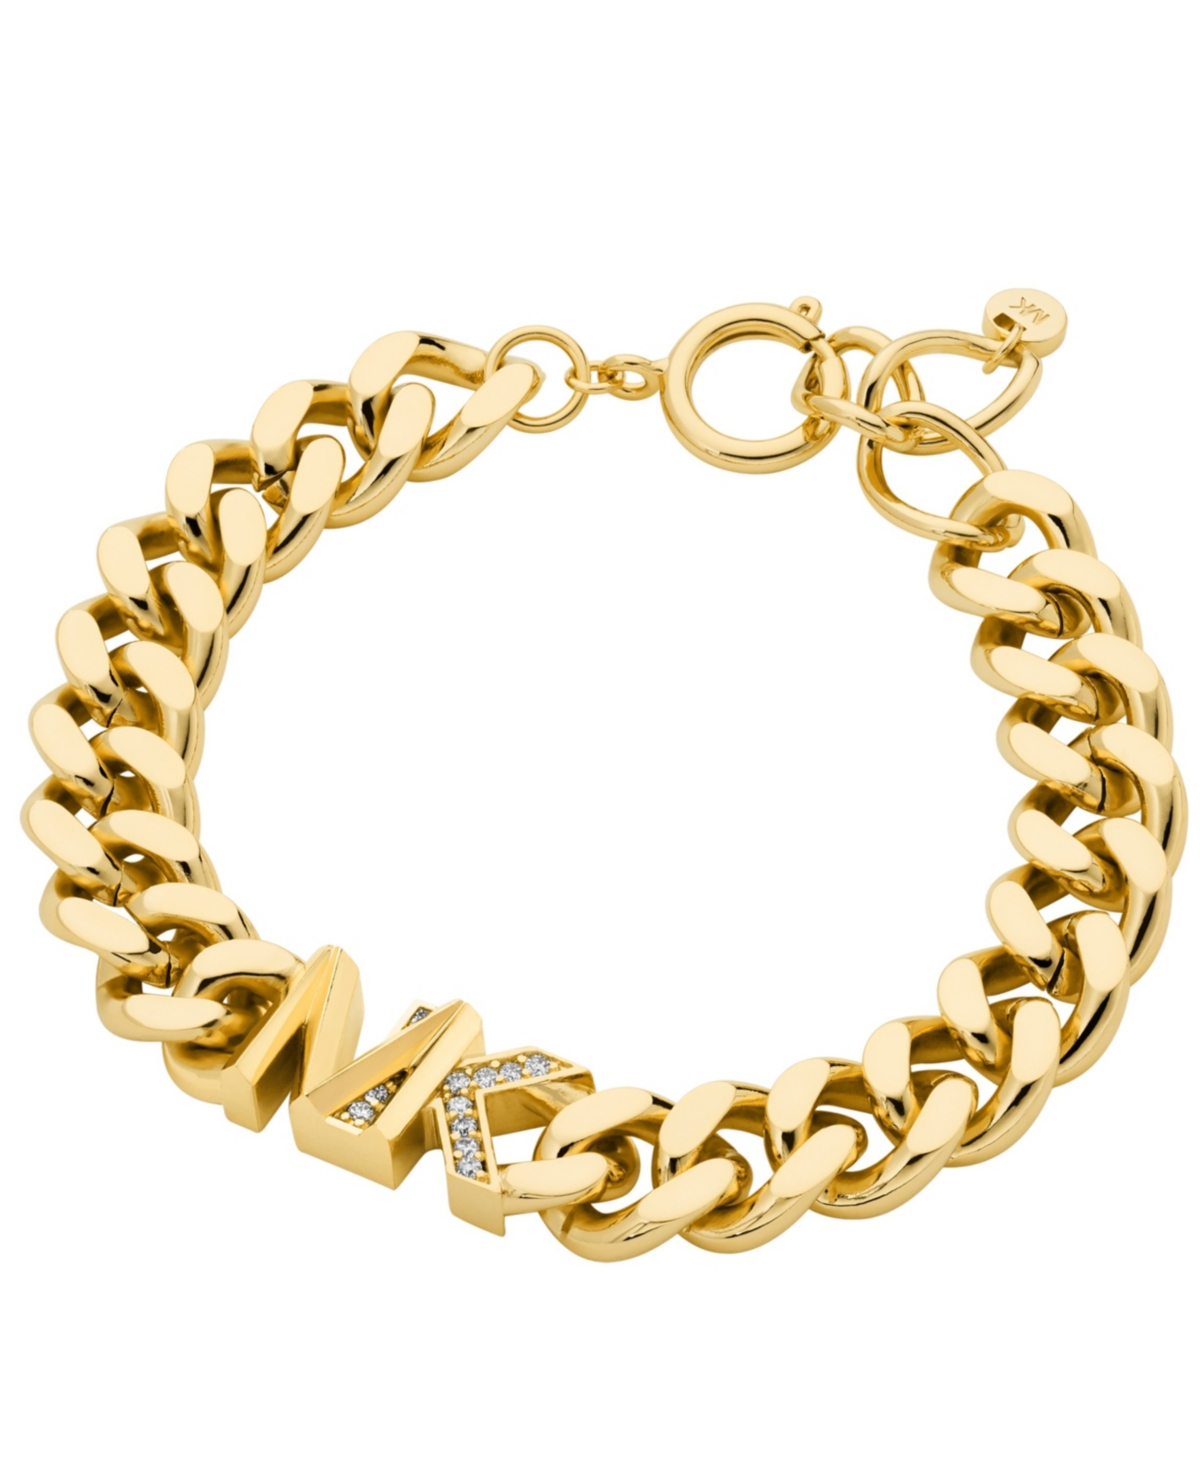 Shop Michael Kors Women's Statement Link Bracelet 14k Gold Plated Brass With Clear Stones In Gold Tone